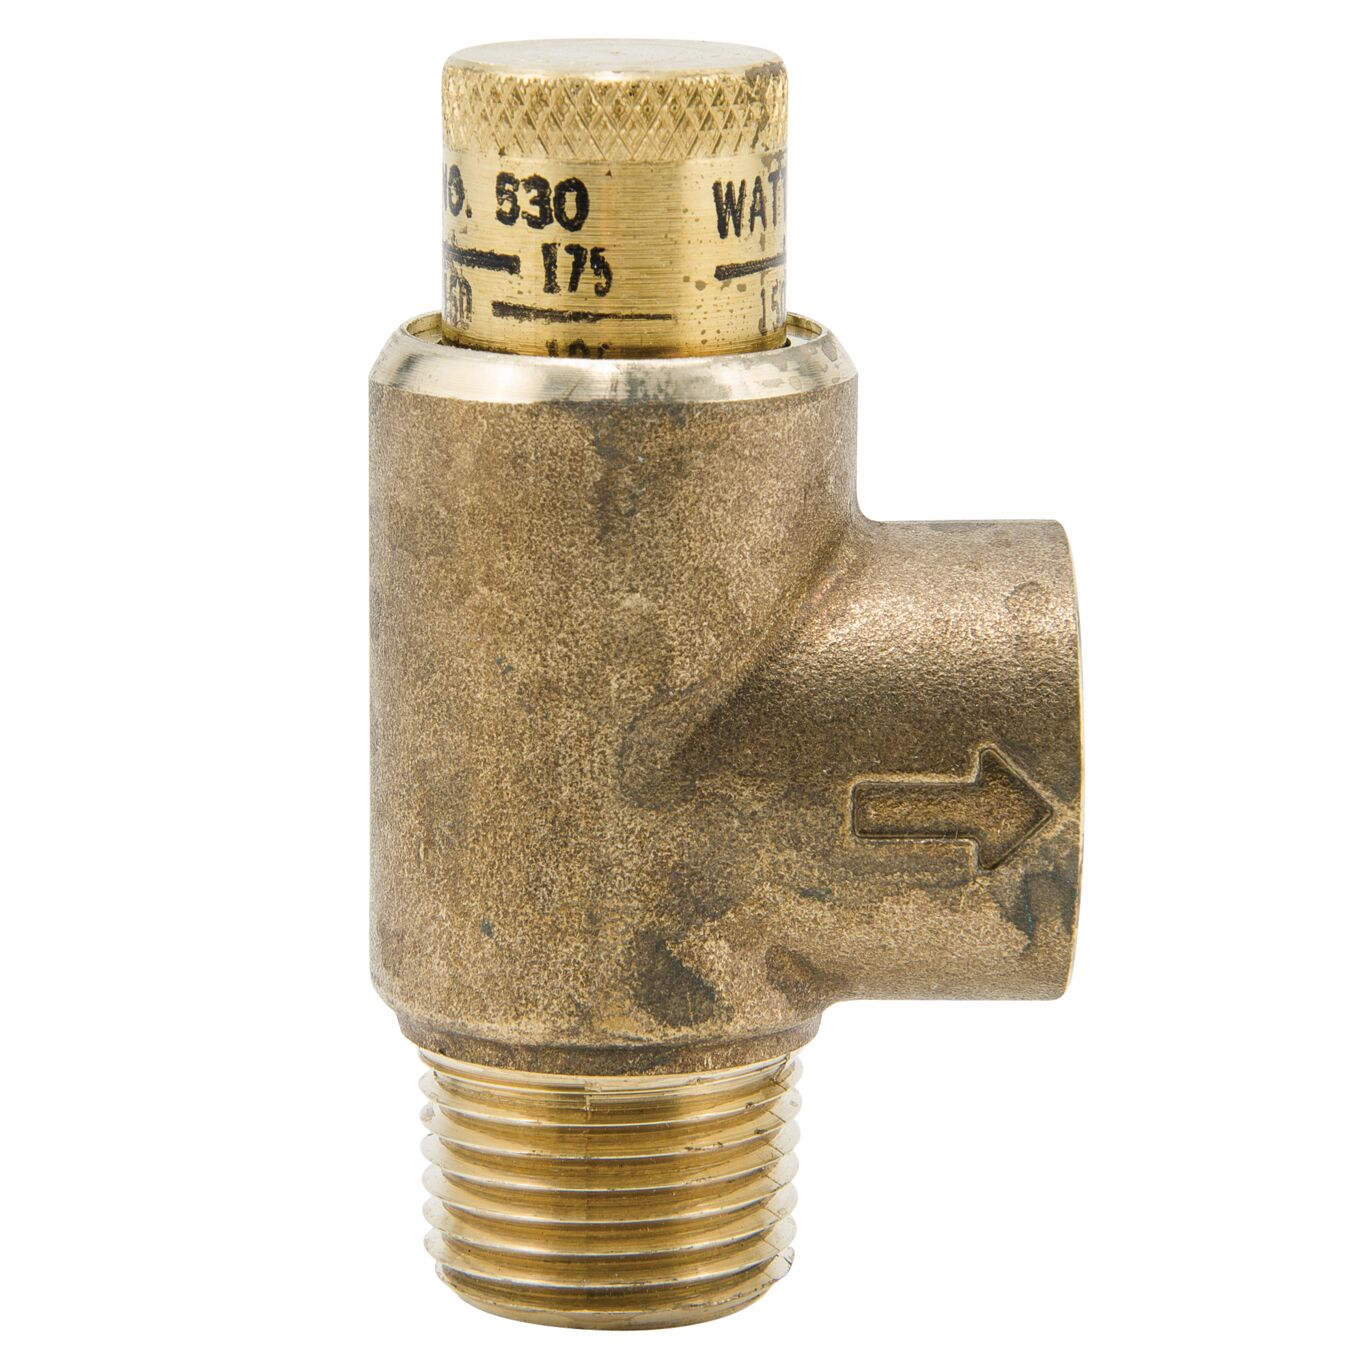 Watts LF530C 1/2" Lead Free Calibrated Adjustable Pressure Relief Valve 50-175Ps 